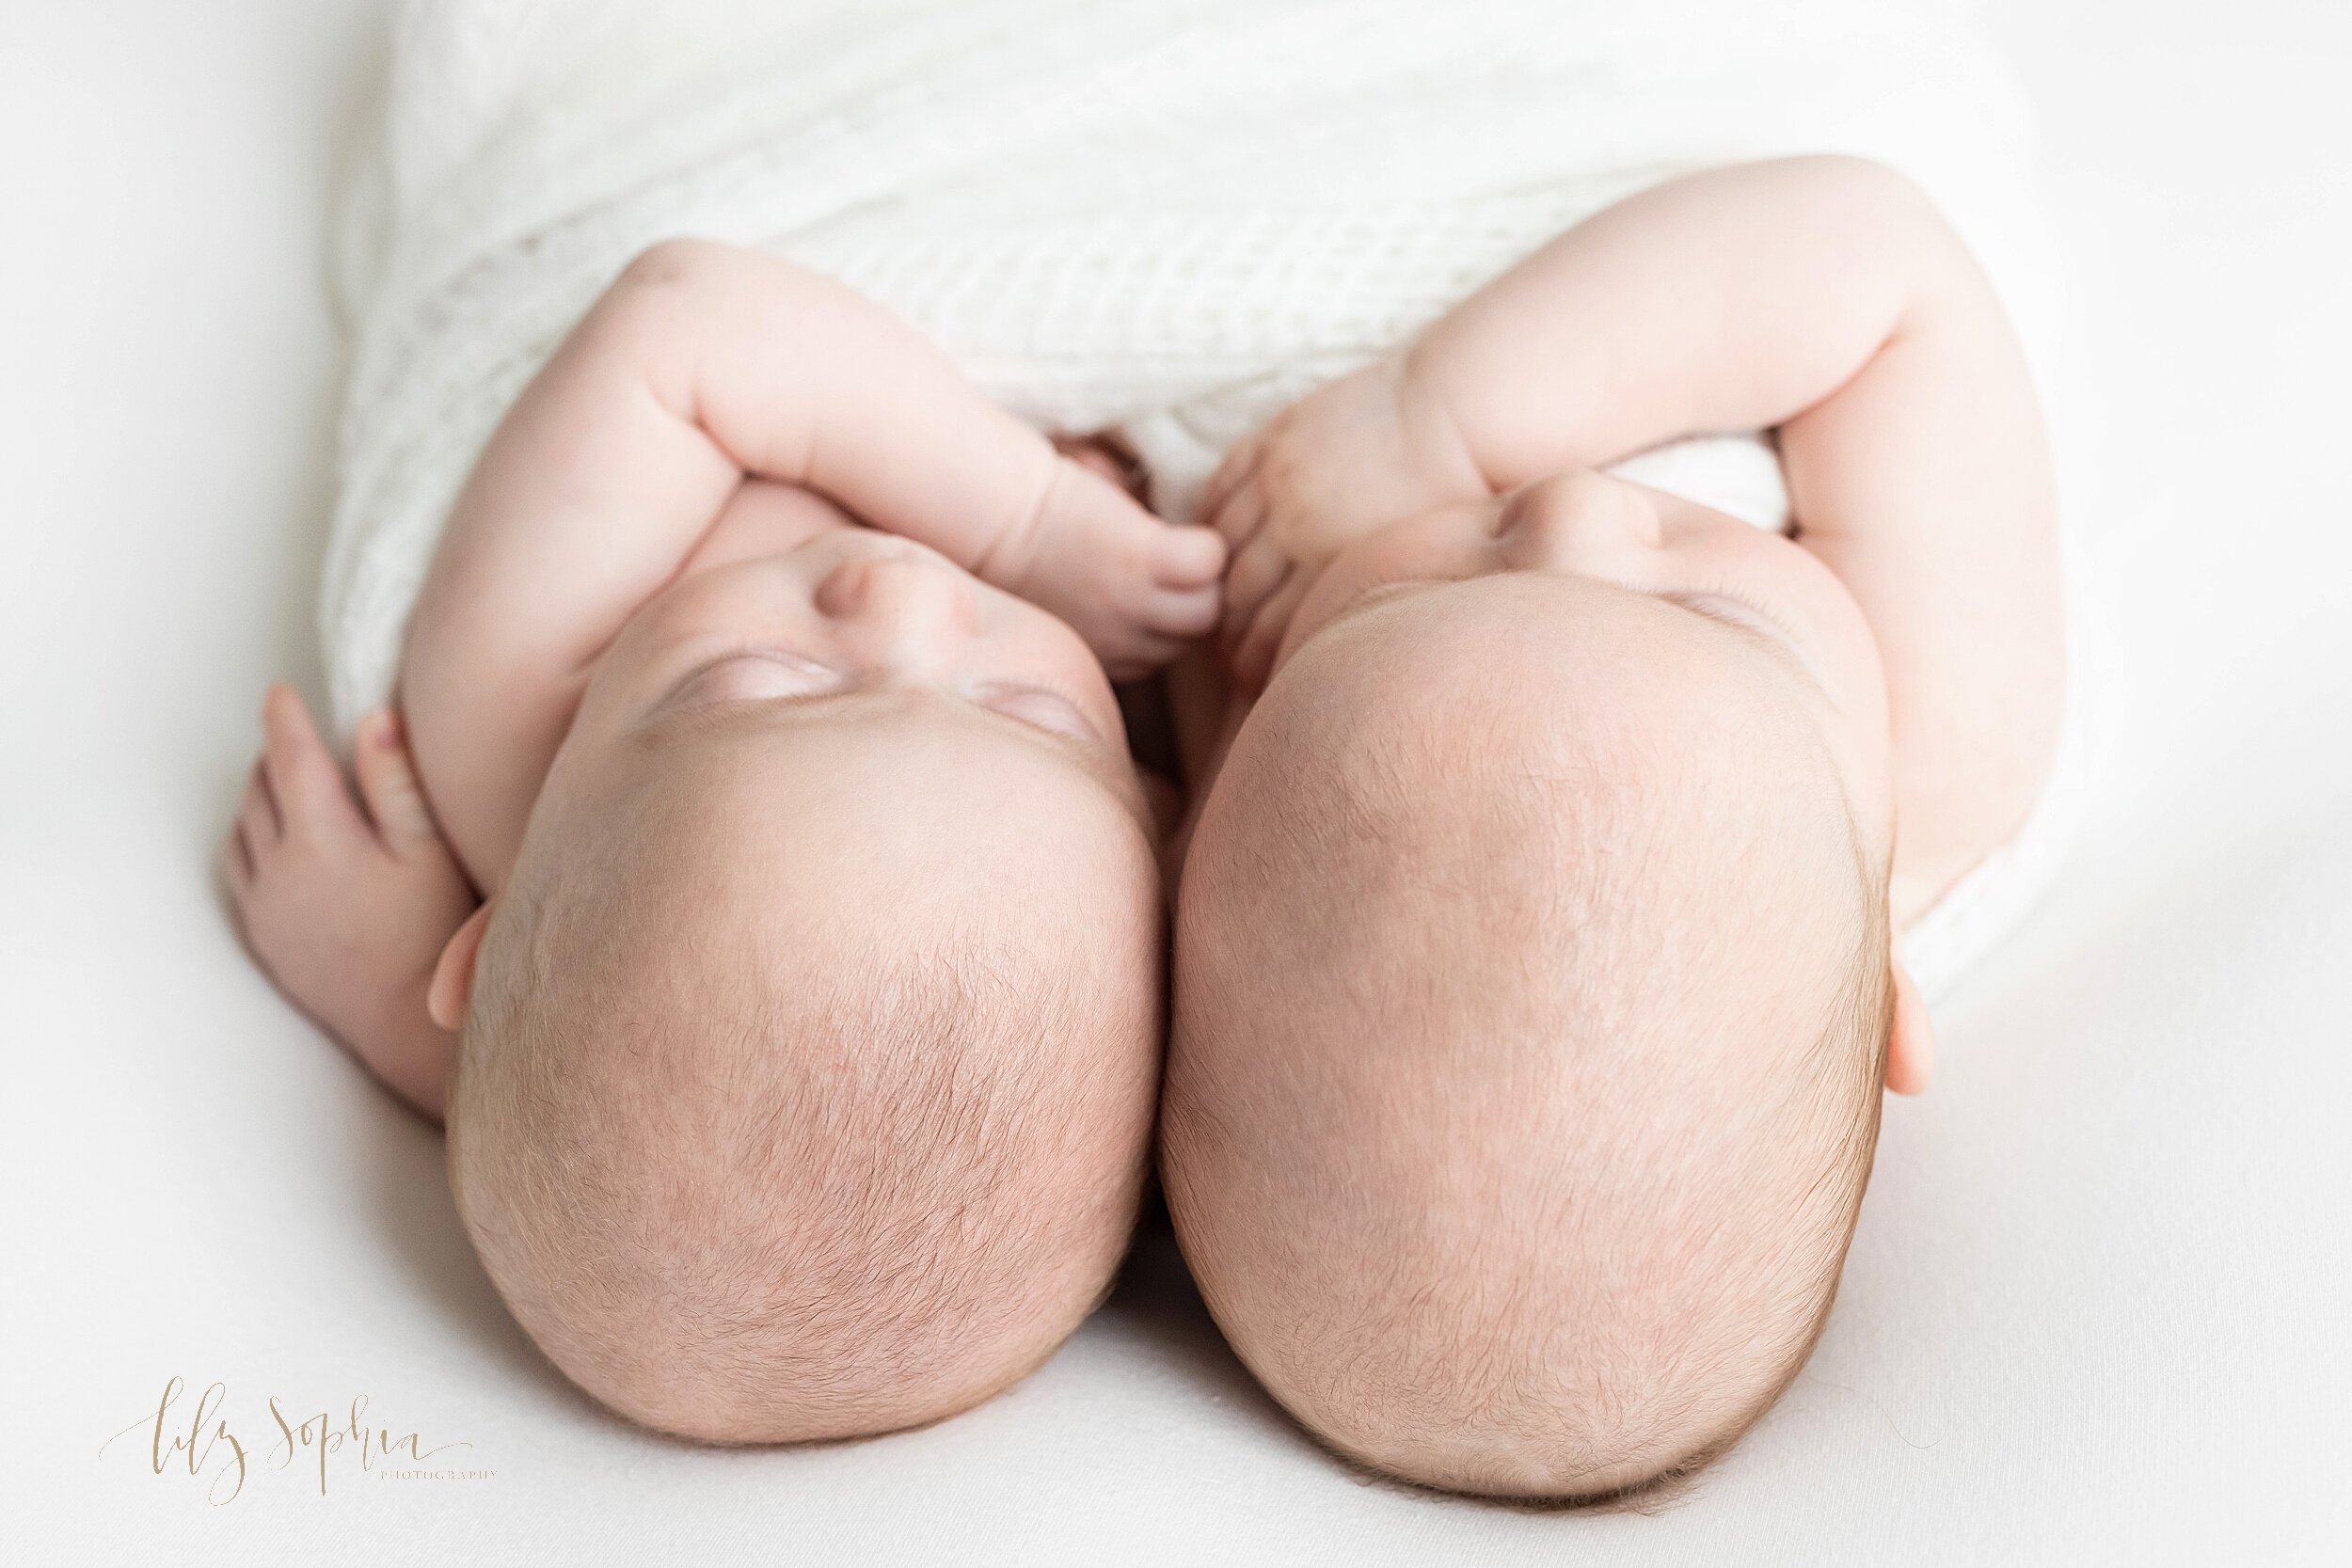  Newborn portrait of twin boys as they lie next to one another on their backs with one of the twins placing his hand around his brother taken in a studio near Morningside in Atlanta using natural light. 